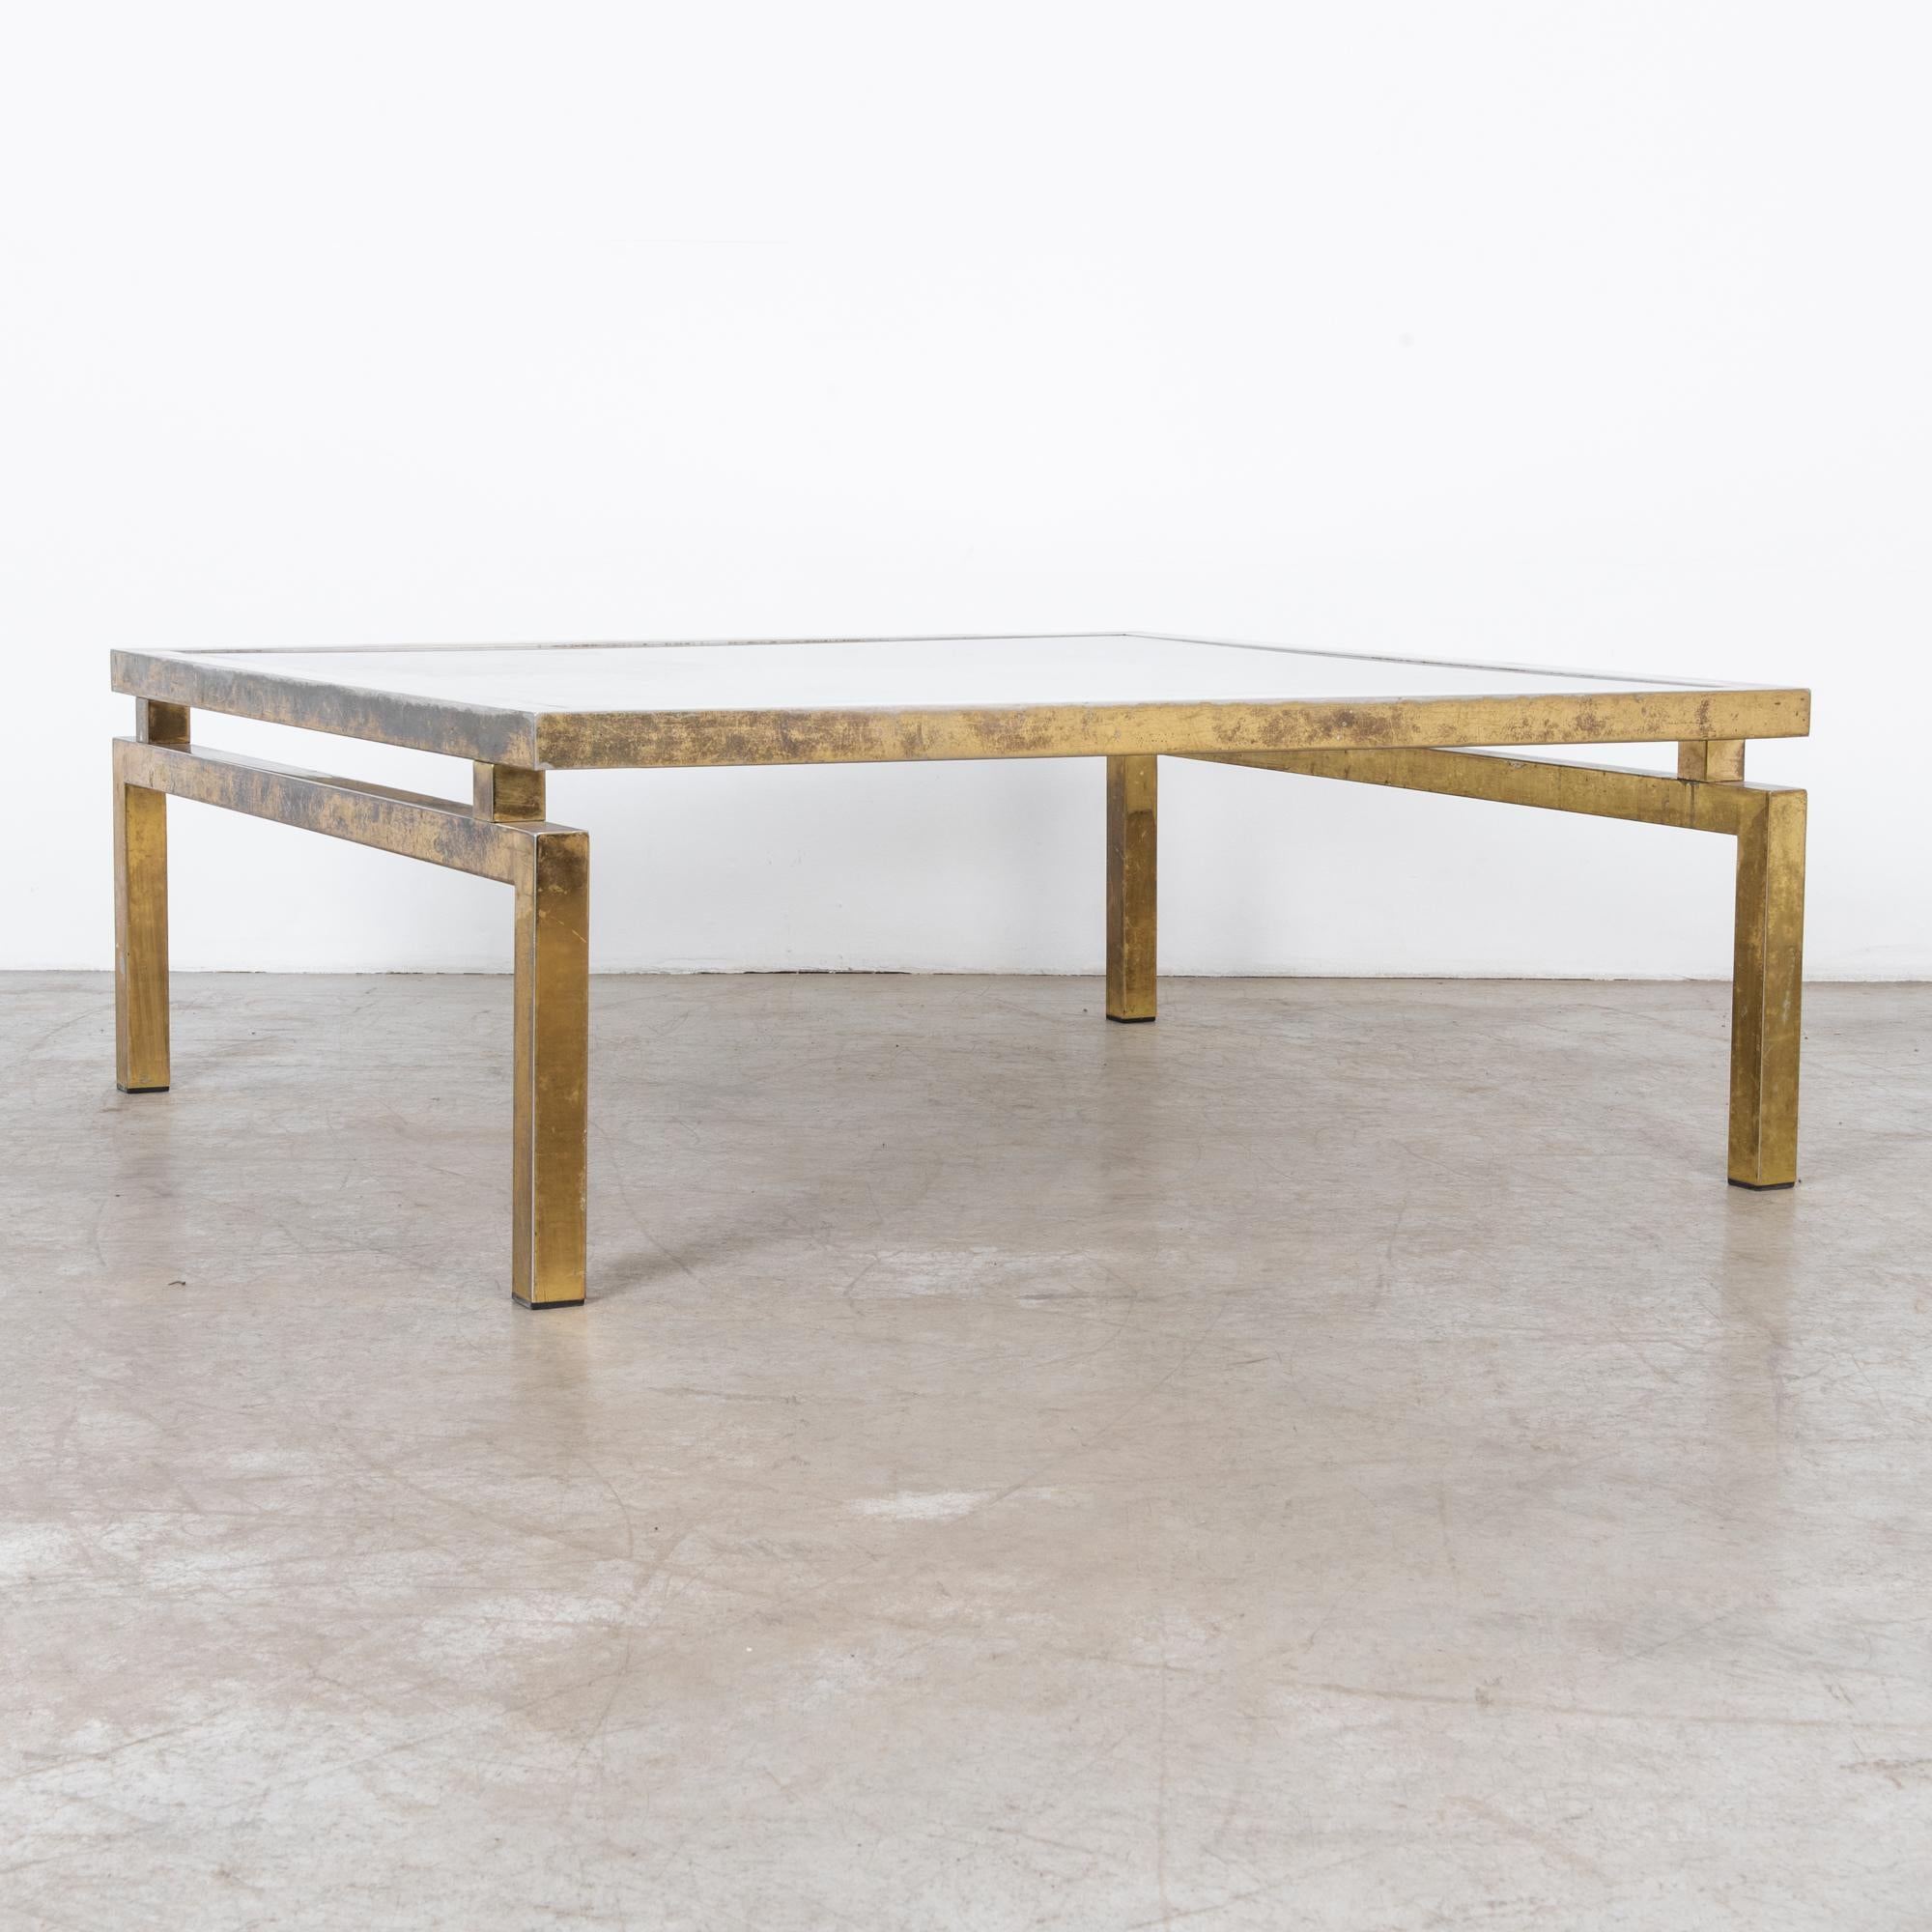 Stylish coffee table with glass top and brass-plated legs. A timeless combination, metal and glass. It screams modernity, precision speed and luxury. The optics of glass recalls primordial associations. Adopted and expanded in the industrial age,